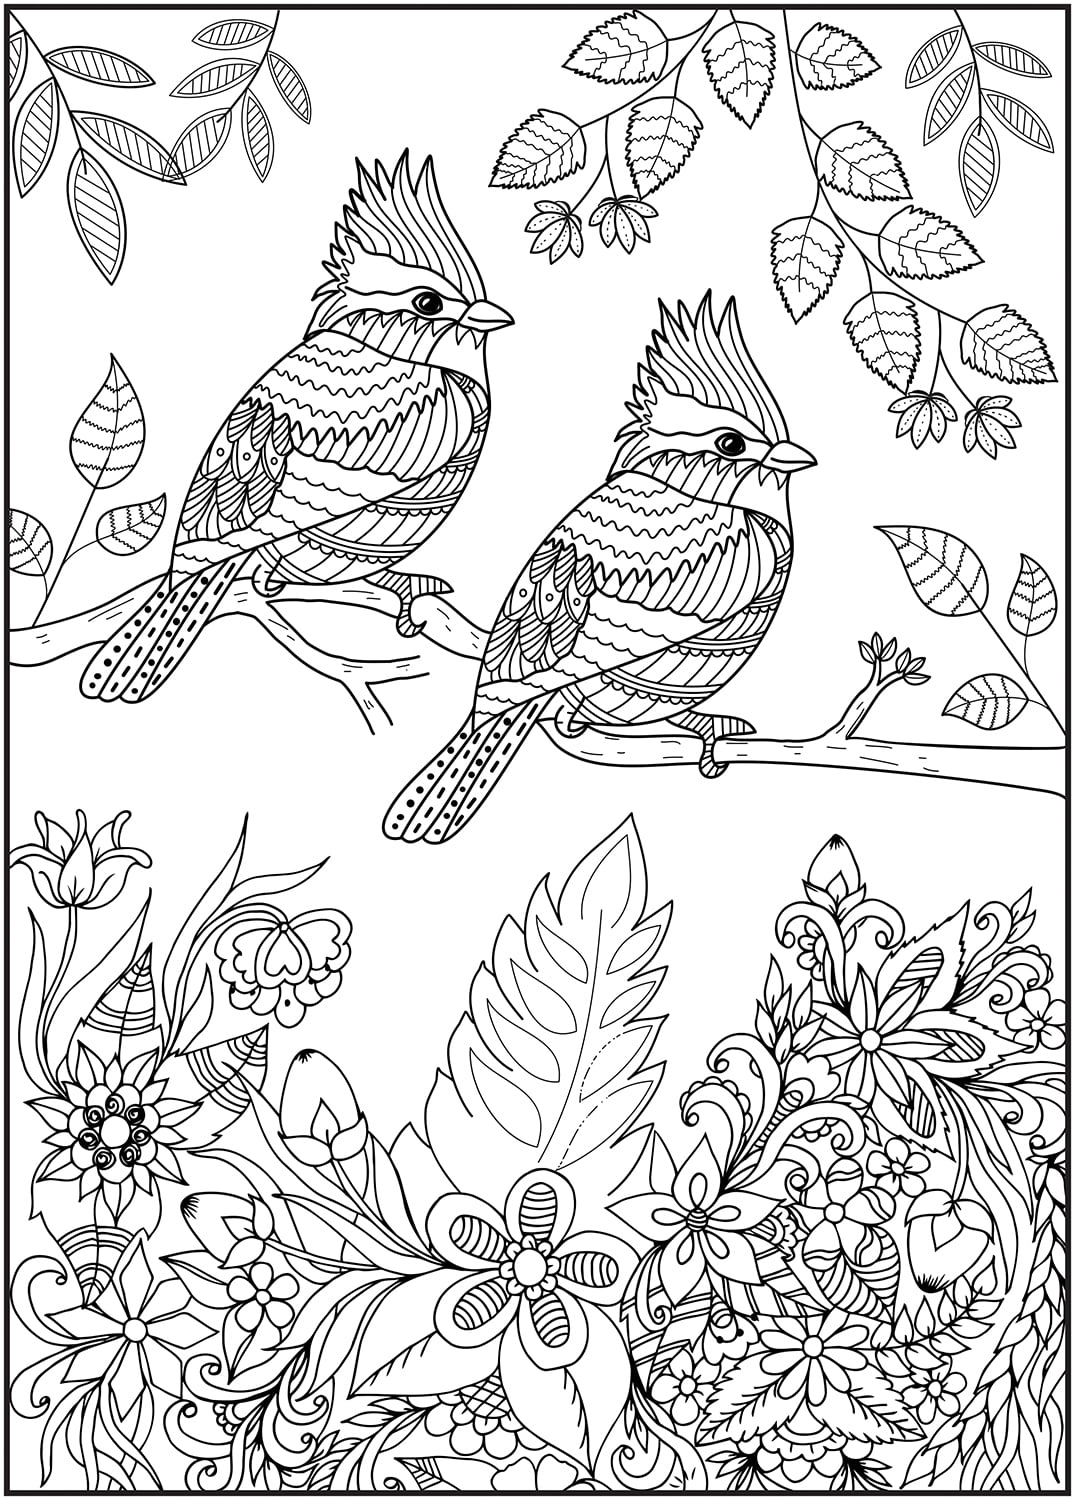 Magical Garden - Timeless Creations - Coloring Book 64 pages (on one side  only)